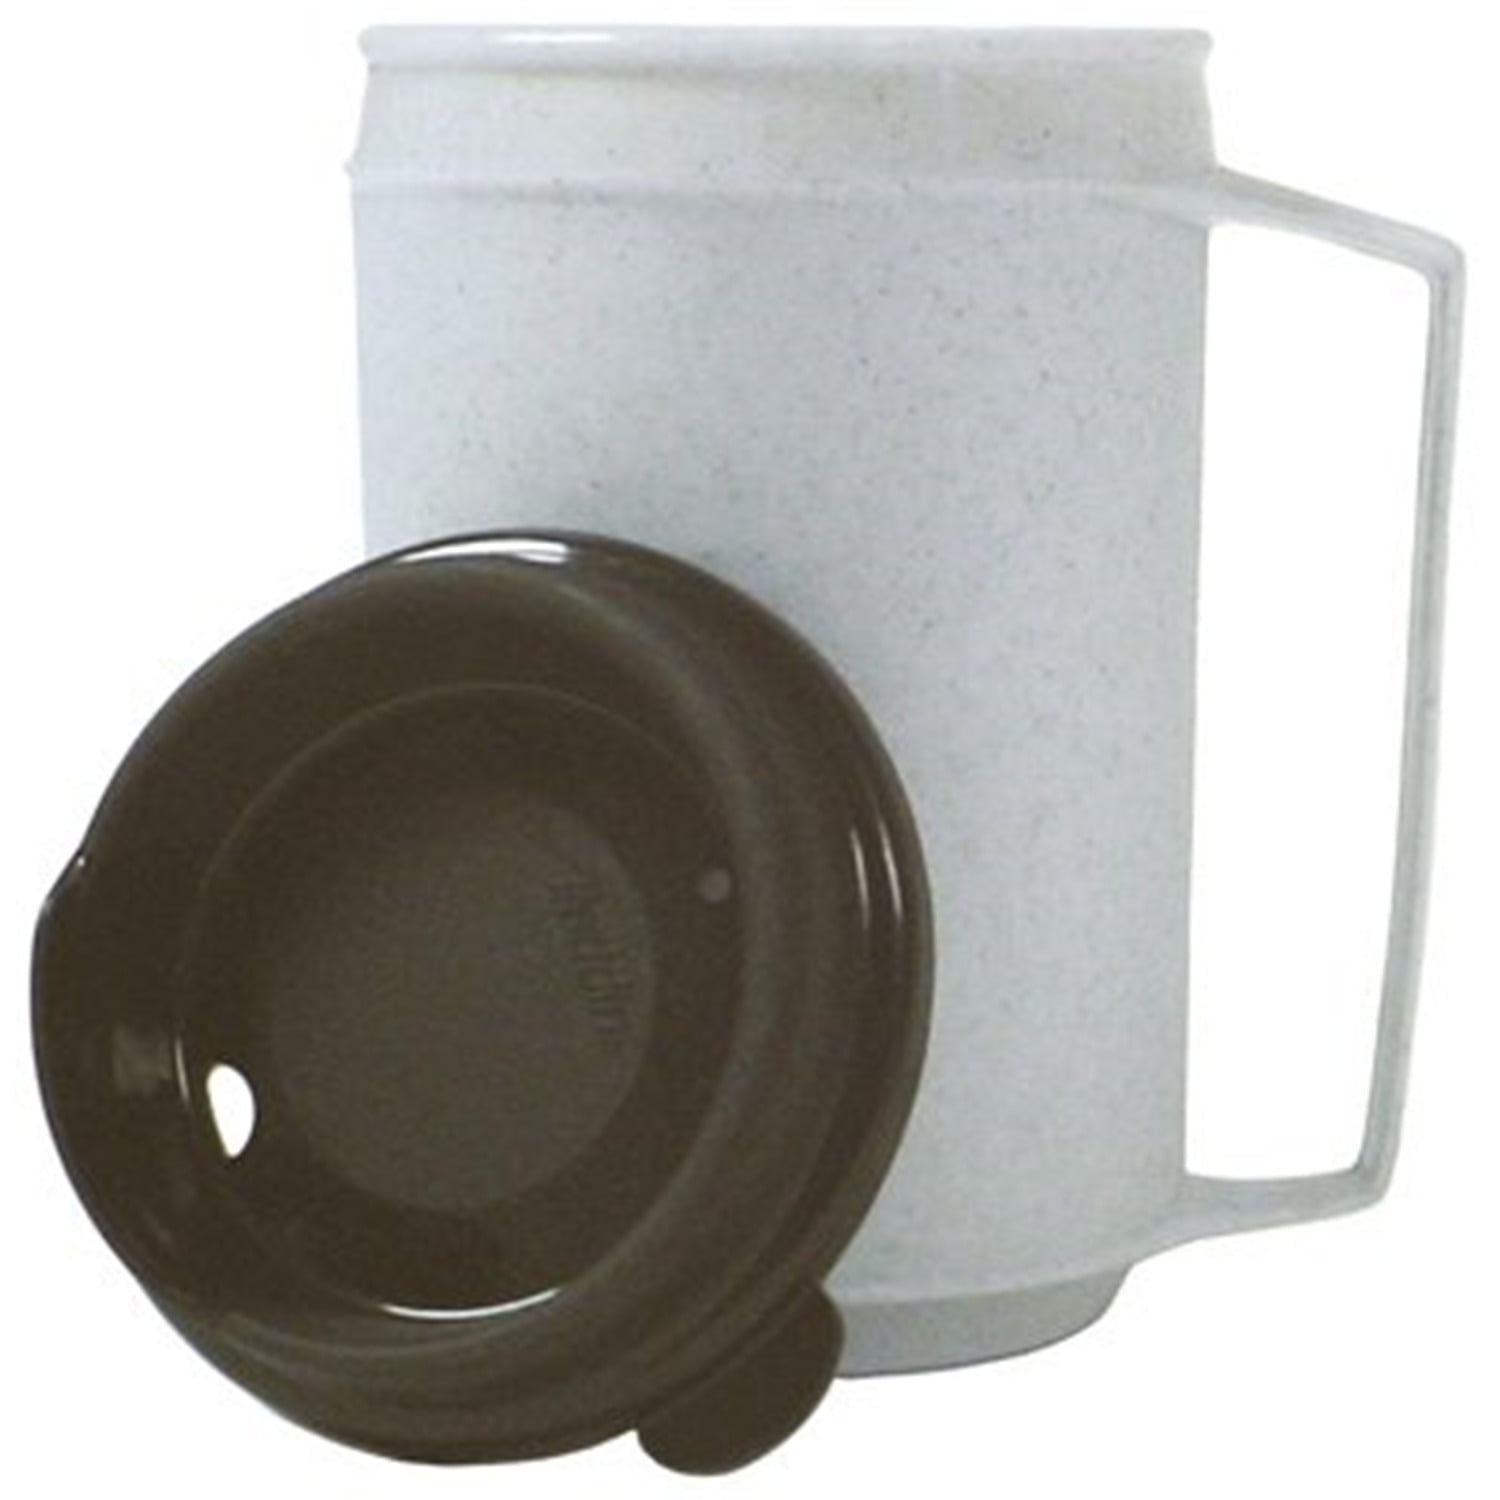 Lid Doubles as 8oz Mug Reduce Insulated Performance Flask White 17oz 